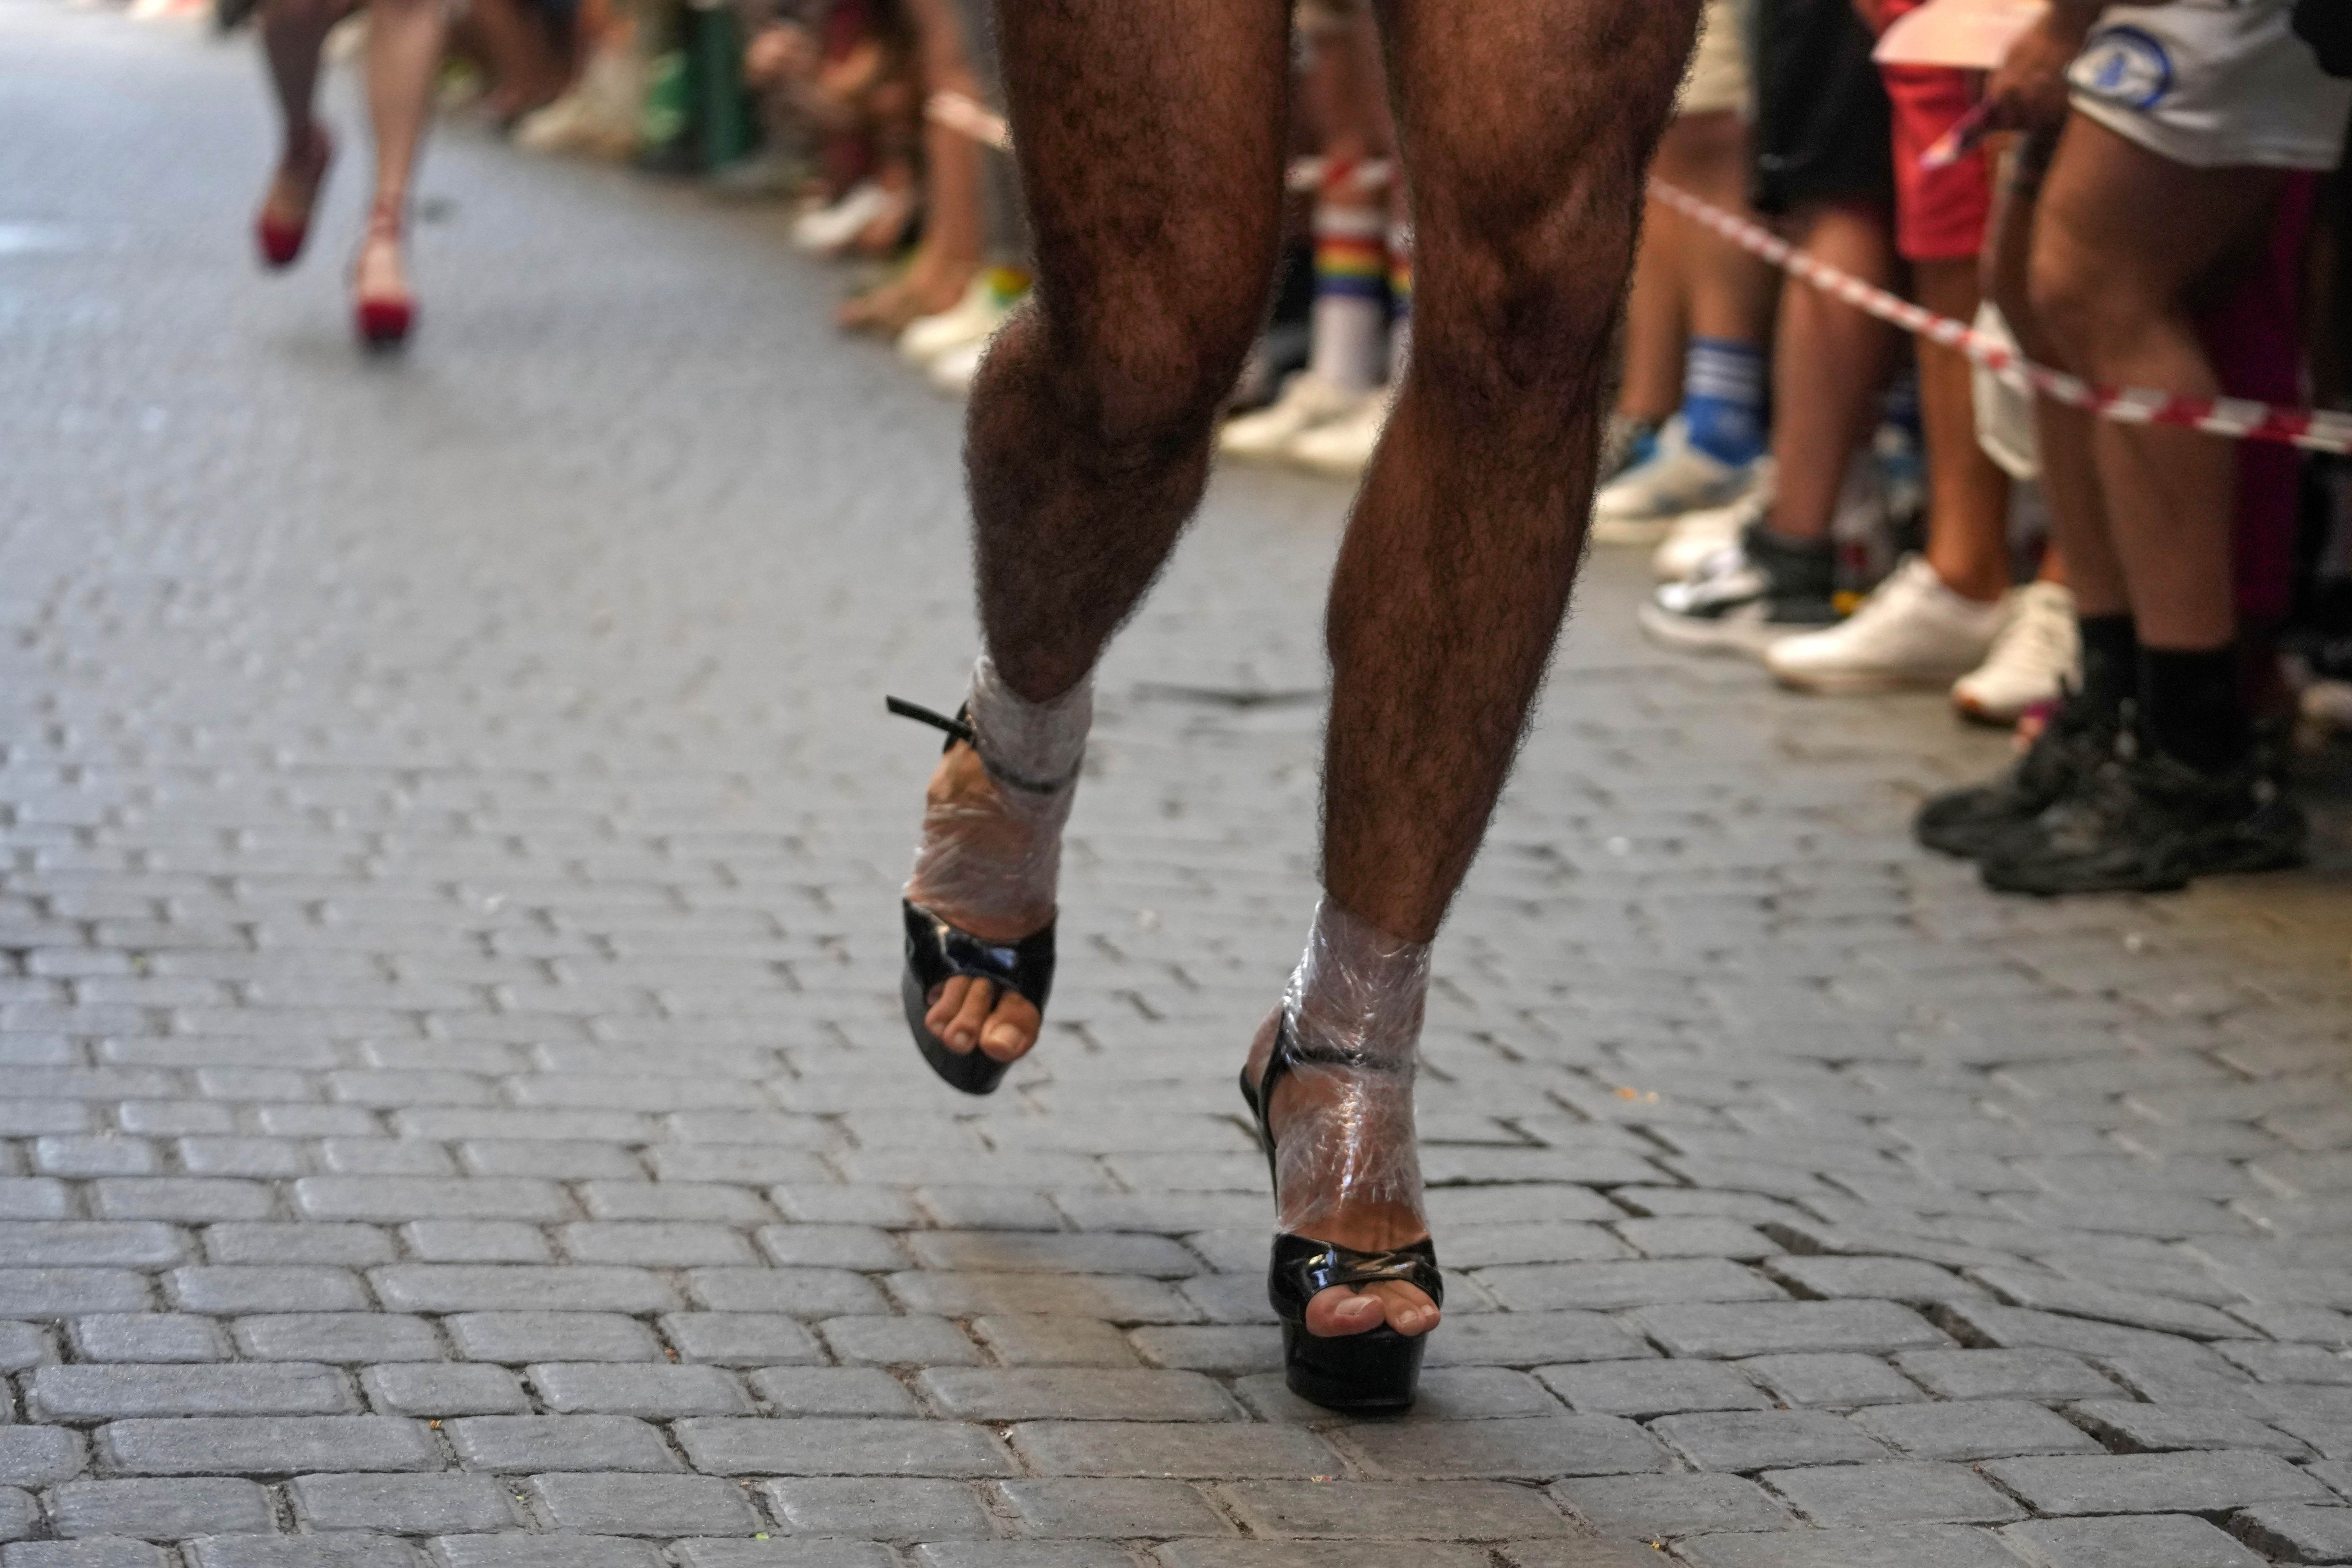 Participants compete during the Pride Week annual high heels race in the Chueca district, a popular area for the gay community in Madrid, Spain, Thursday, July 4, 2024. (AP Photo/Paul White)